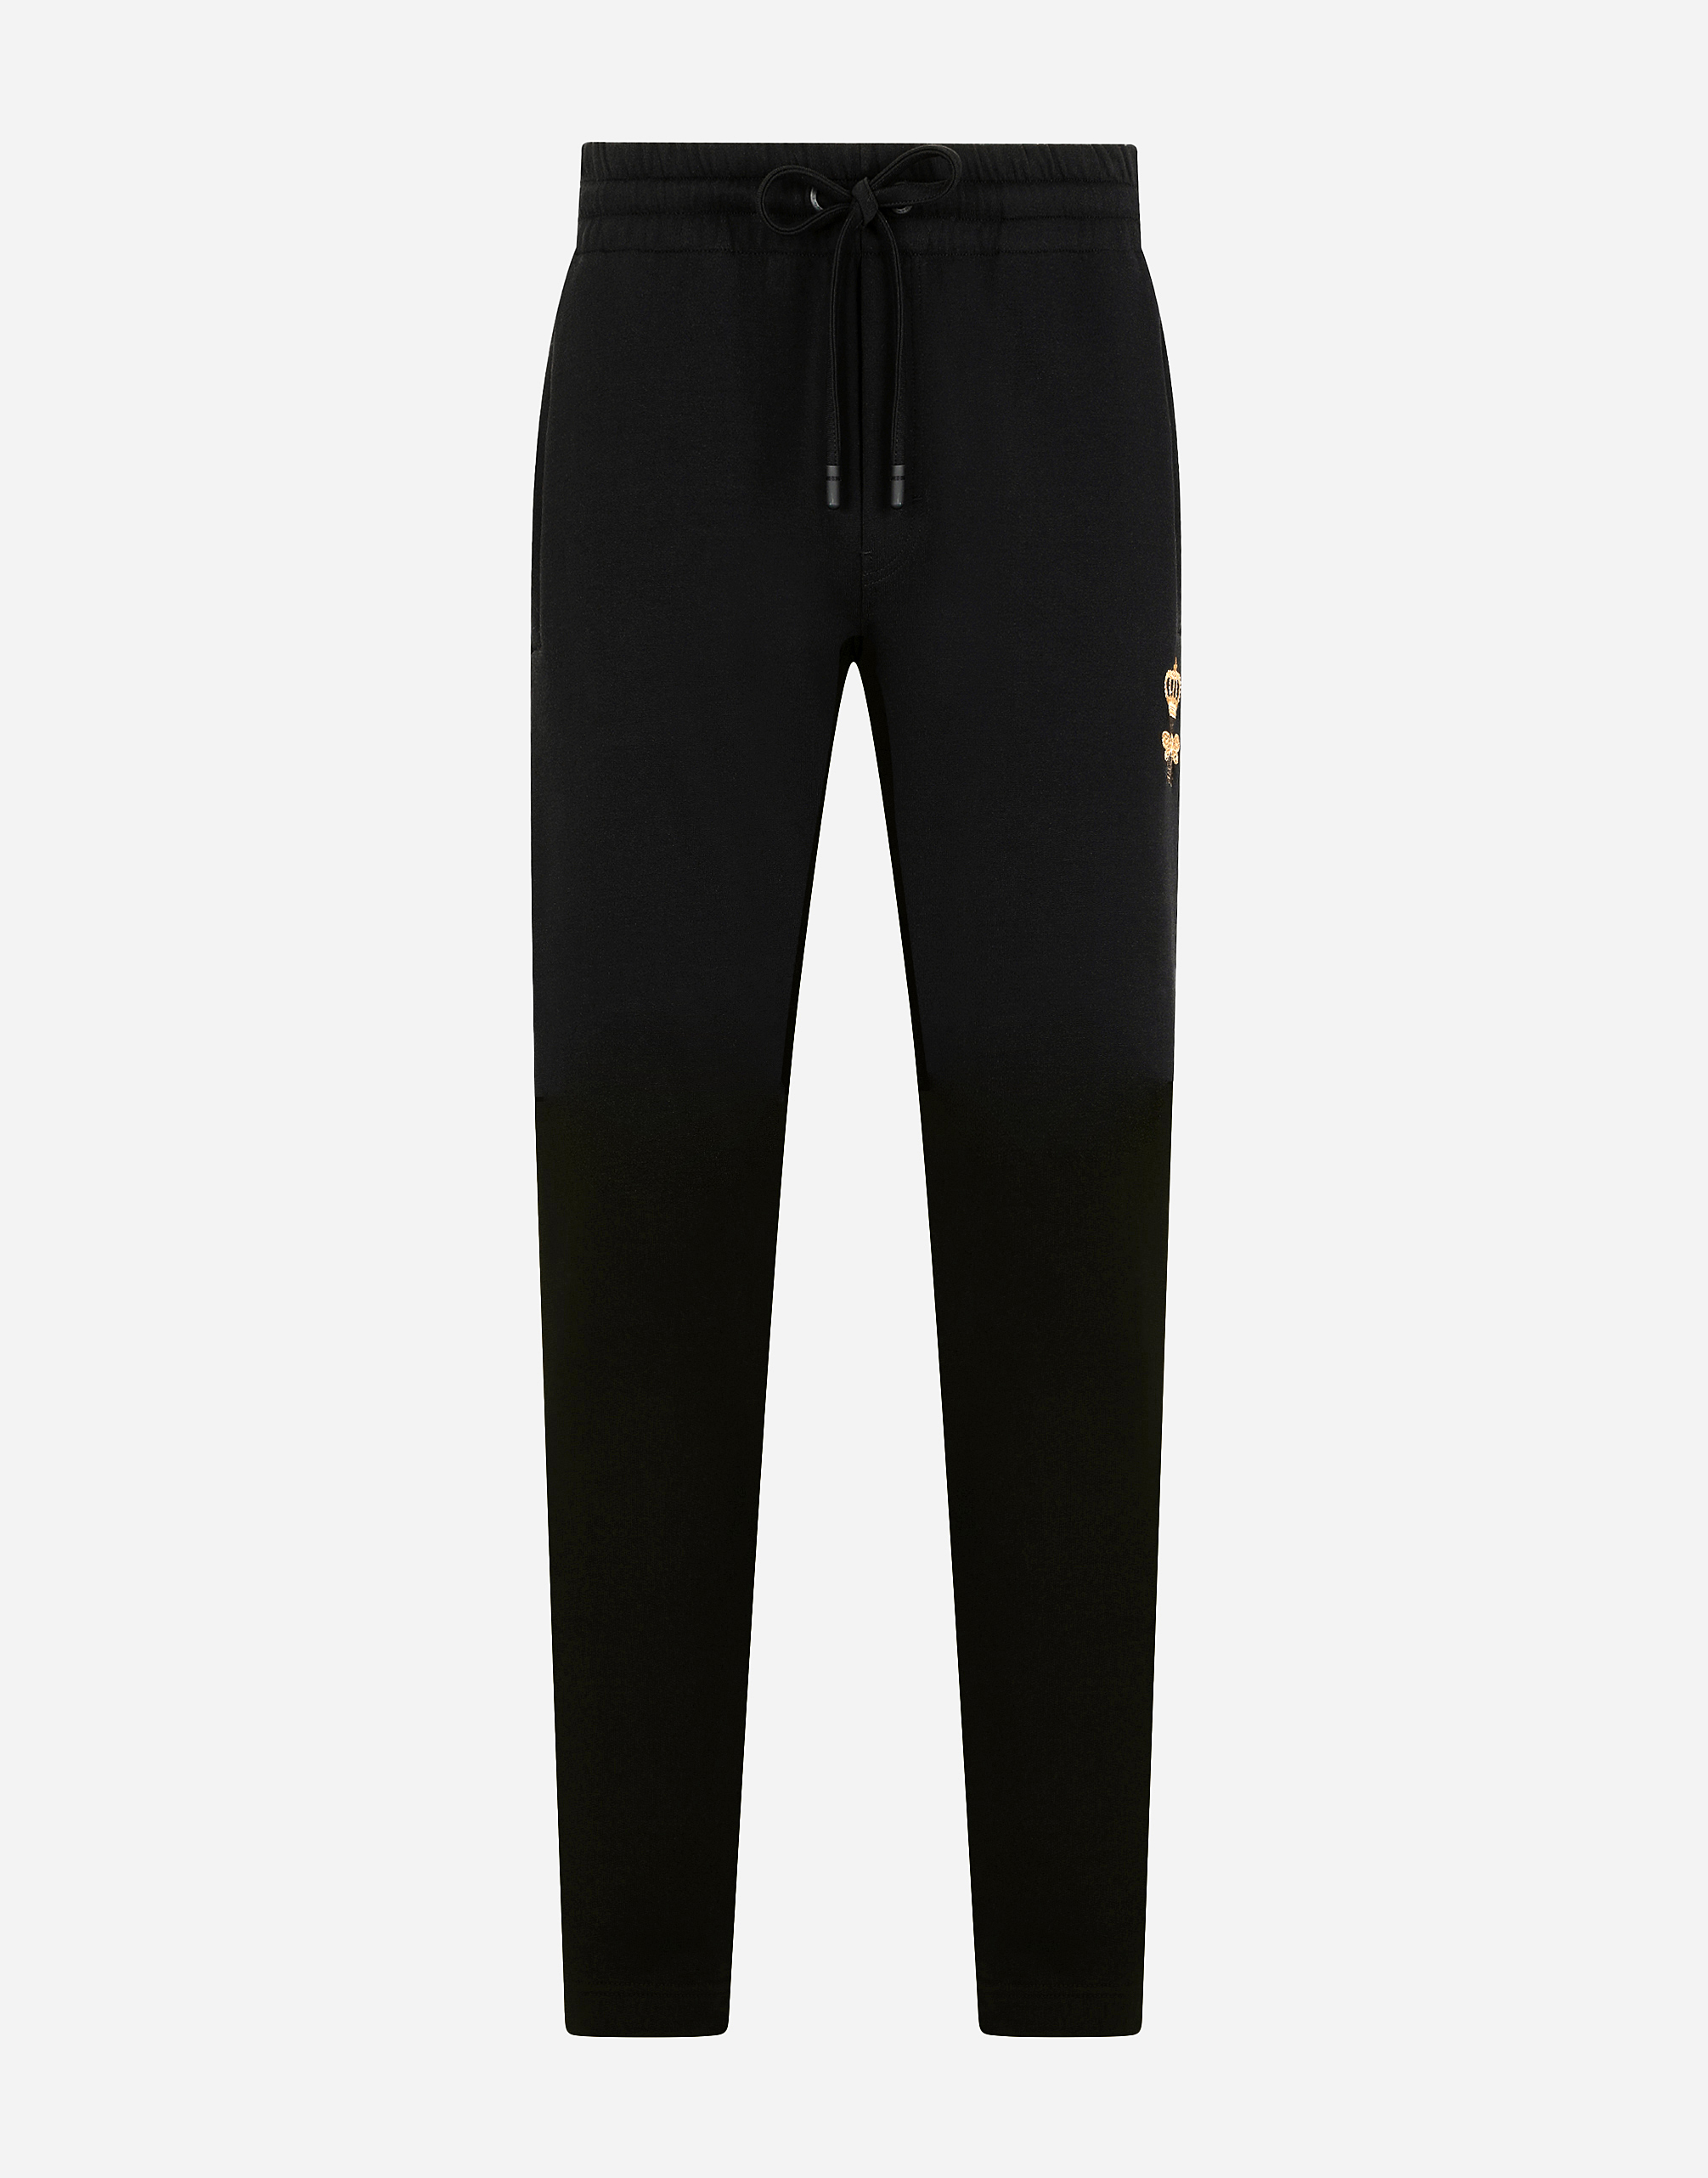 Jersey jogging pants with embroidery in Black